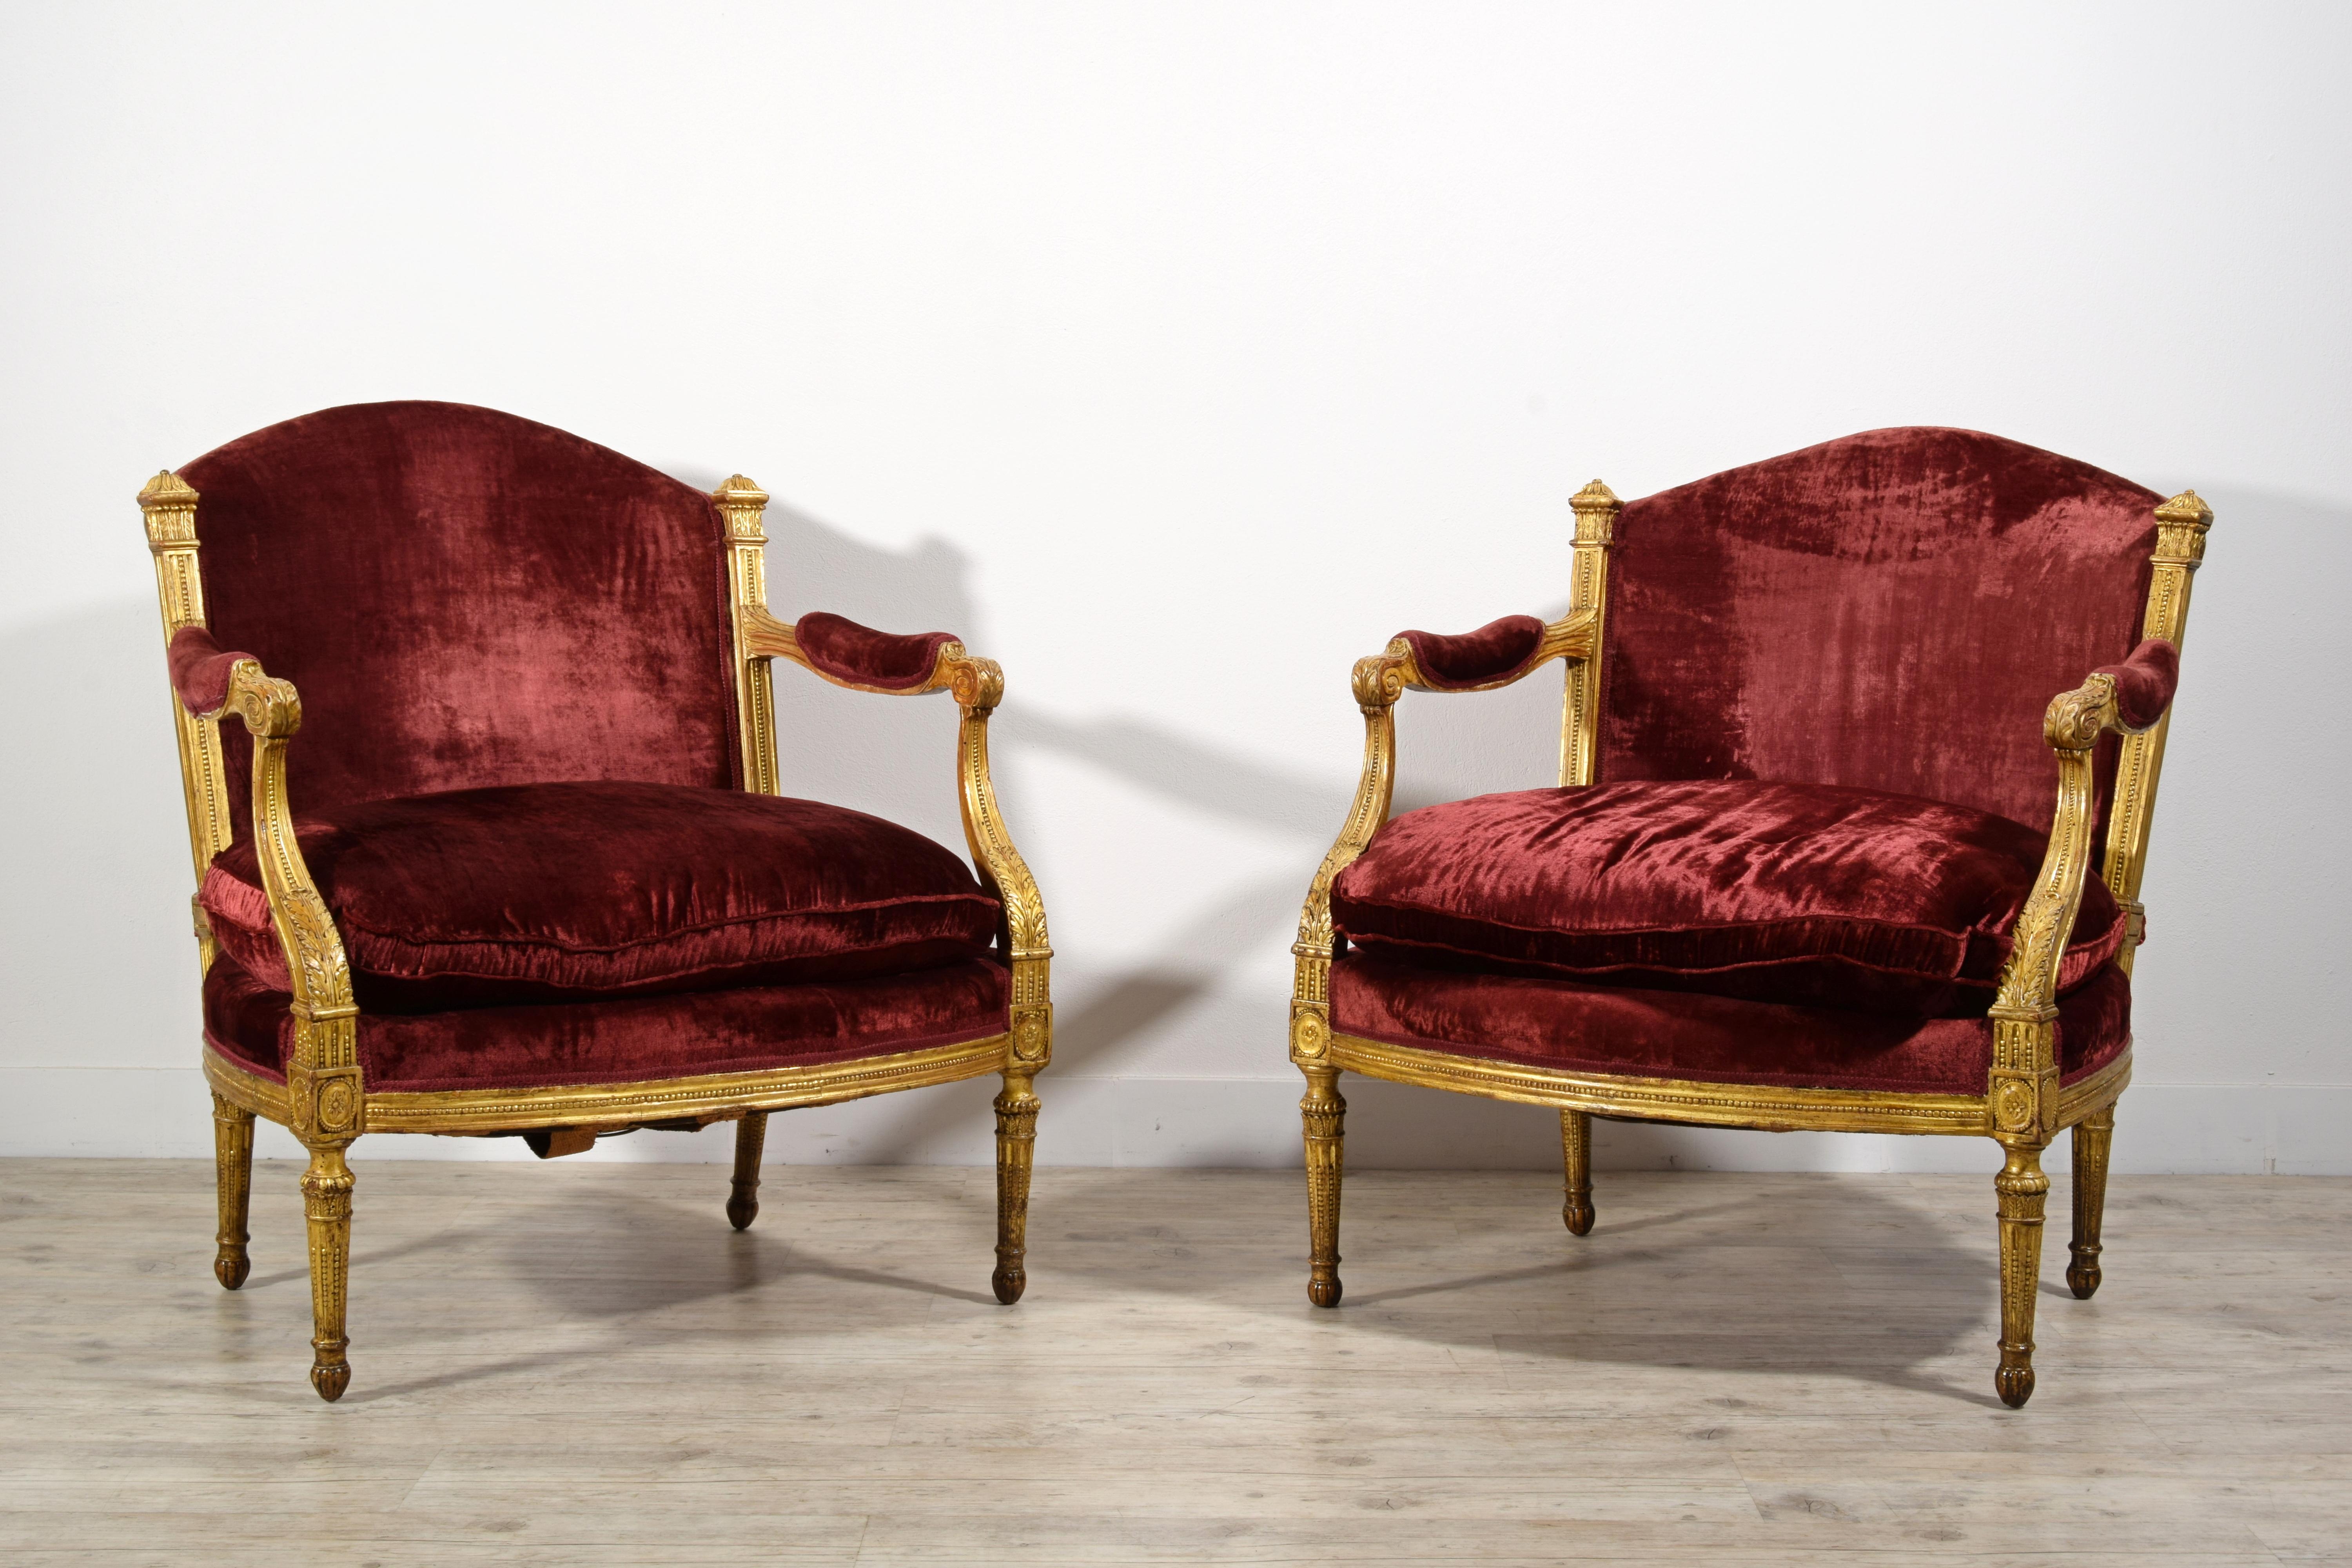 18th century Pair of Italian Large Wood Armchairs 
Measures: cm W 83 x D 90 x H 96; seat cm H 55 x W 72 x D 70
This pair of armchairs was made in the neoclassical period, towards the end of the eighteenth century. The structure of each large